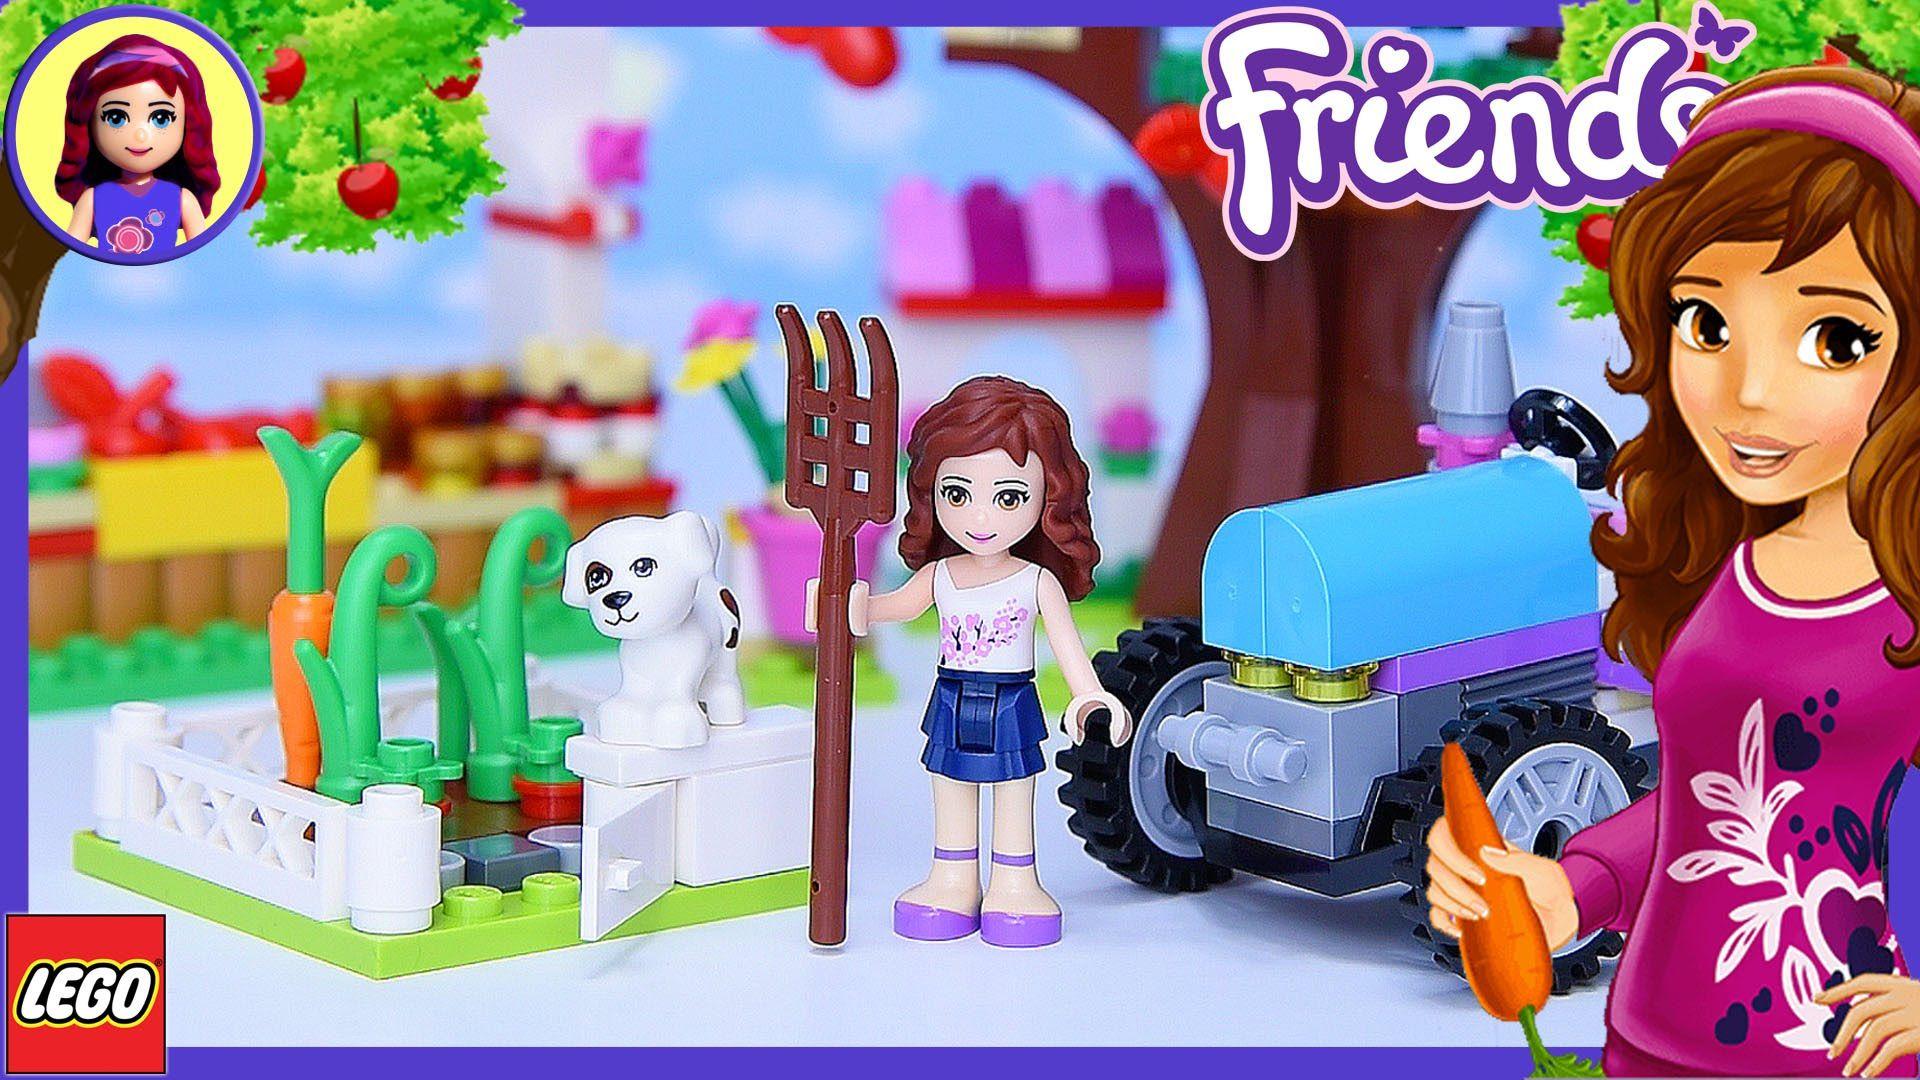 Download Lego Friends Wallpapers.